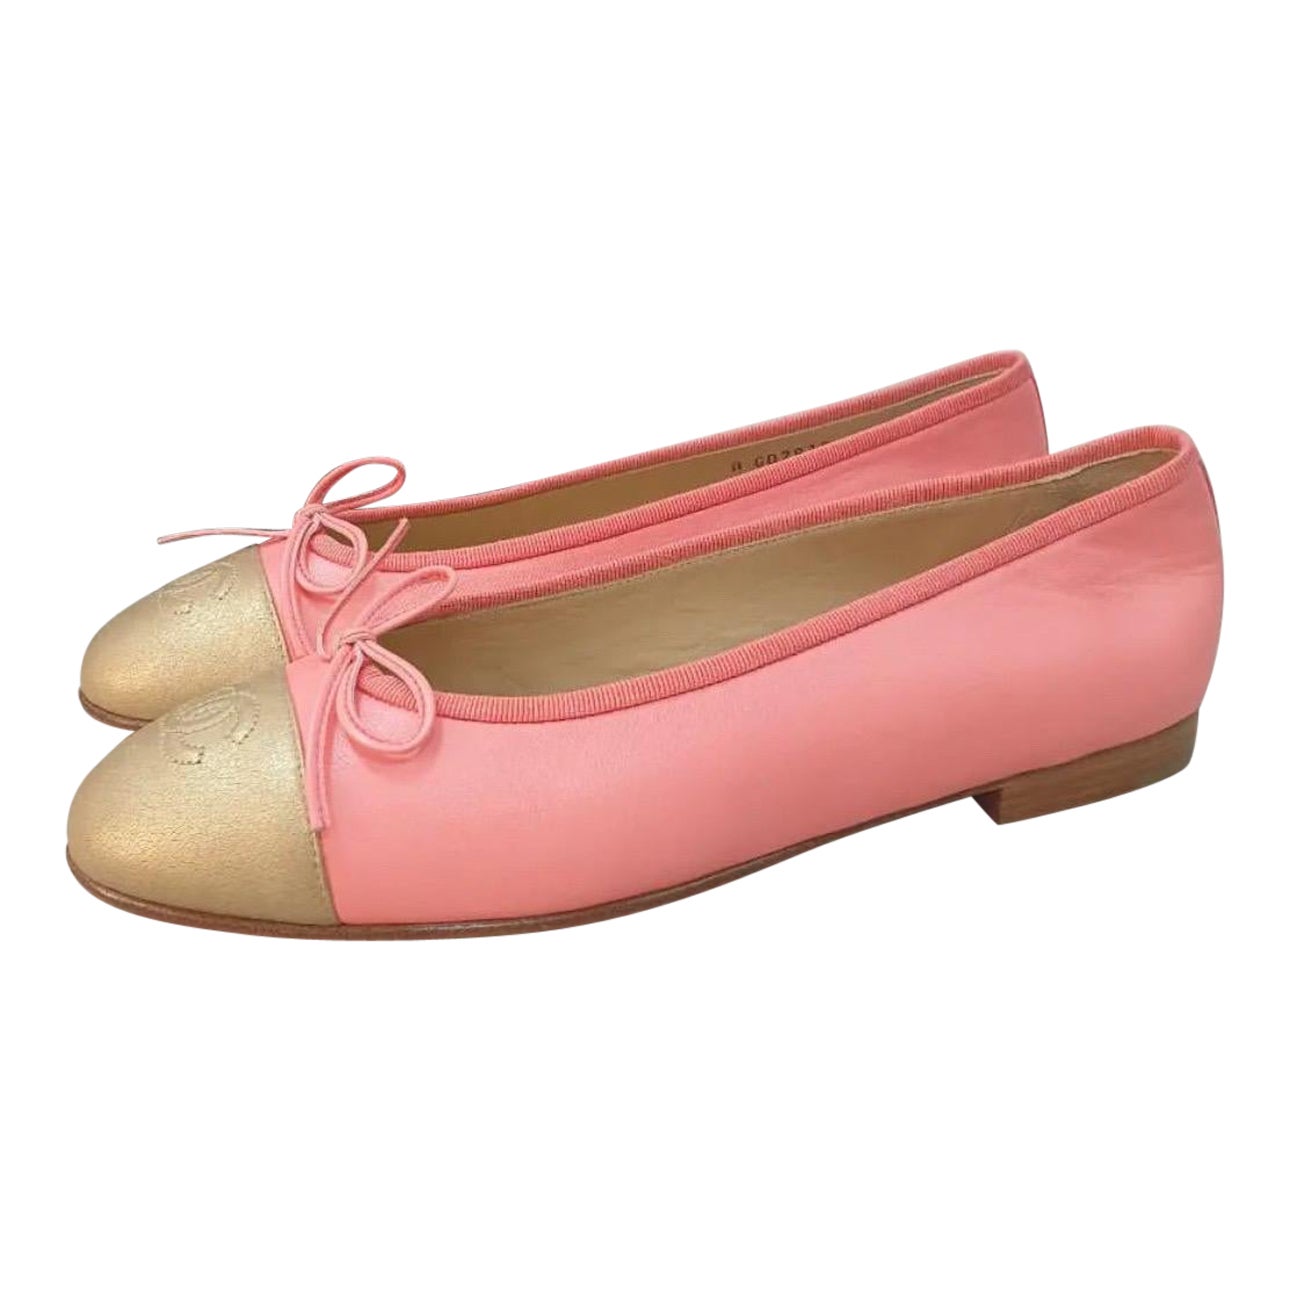 Chanel Pink Gold Leather Cap Toe Ballet Flats